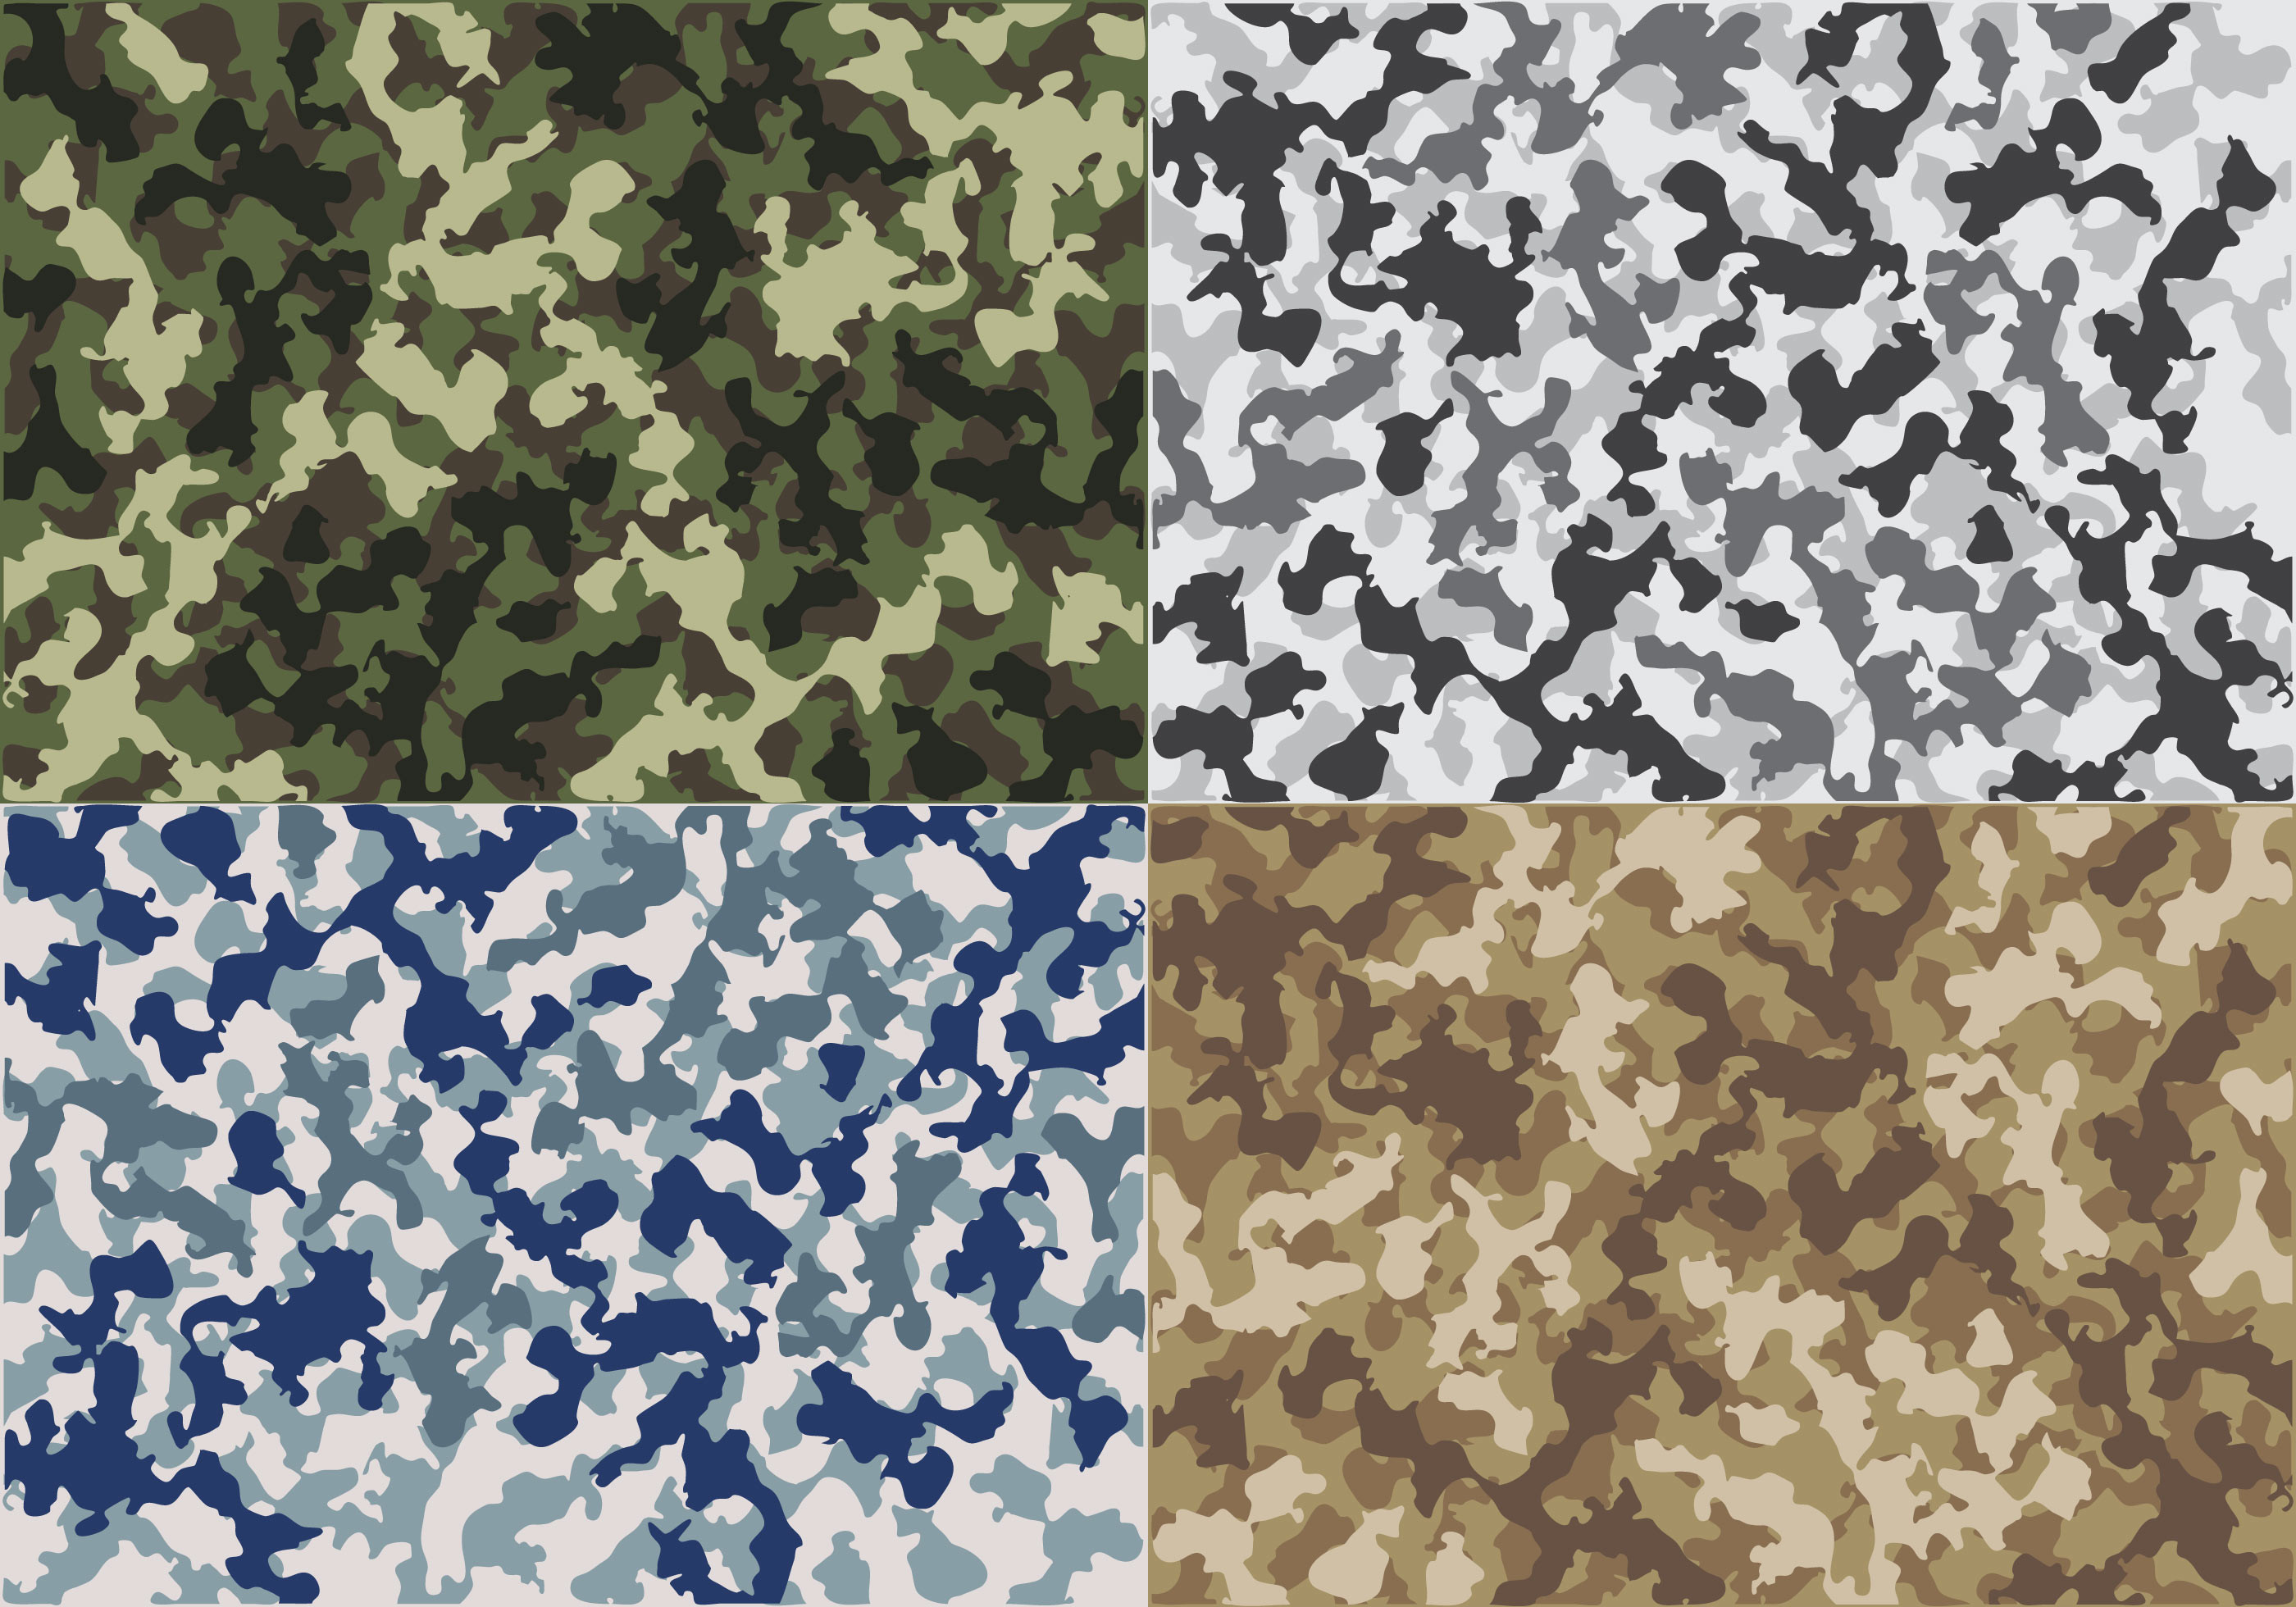 2800x1960 Navy Camouflage Background Patterns - Download Free Vector Art, Stock  Graphics & Images